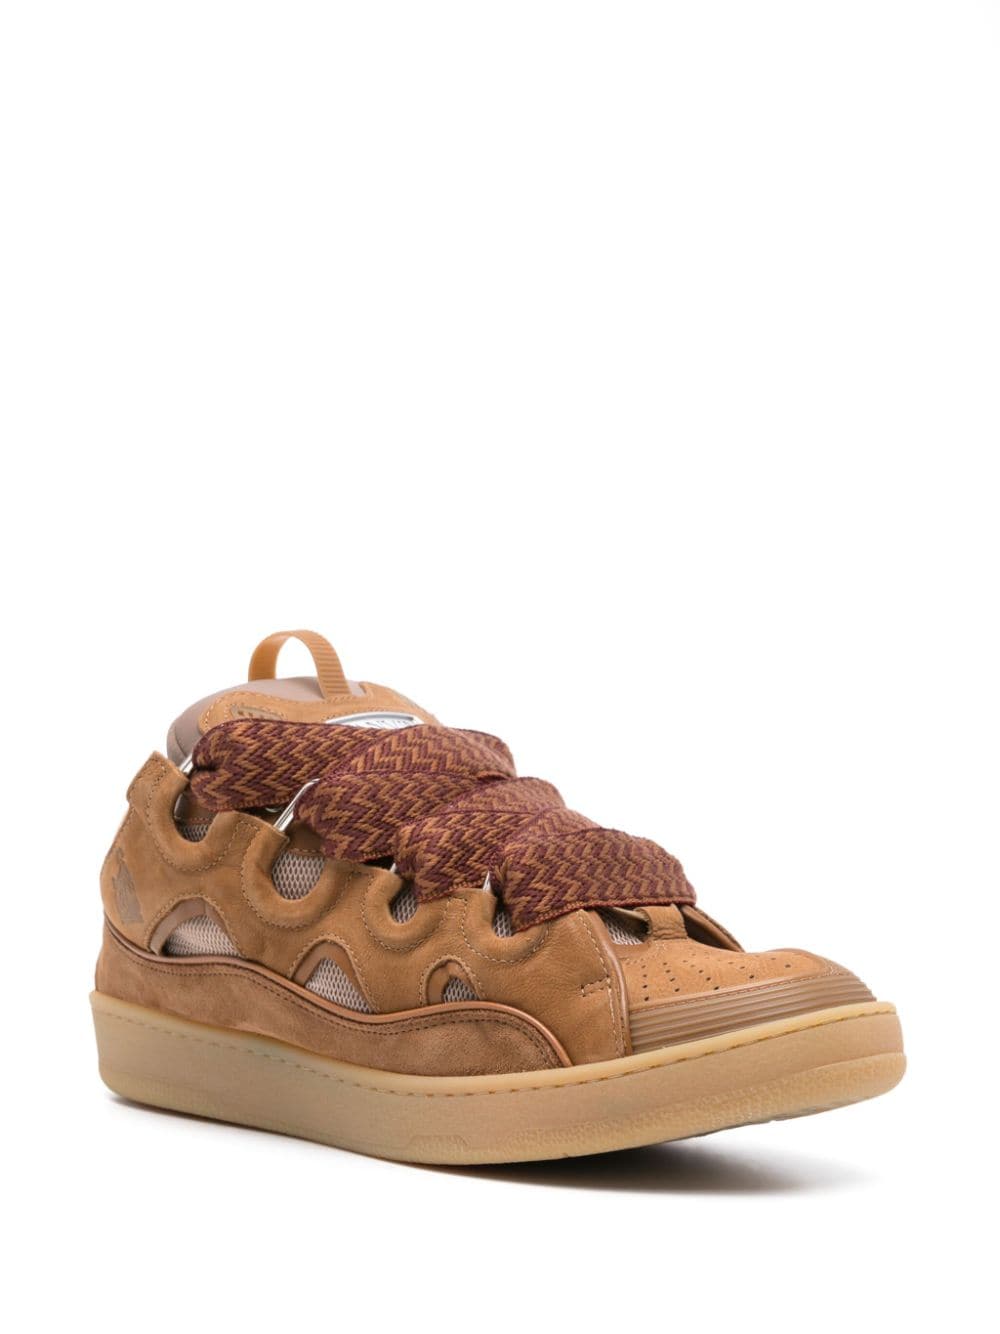 Lanvin Curb leather sneakers - Bruin